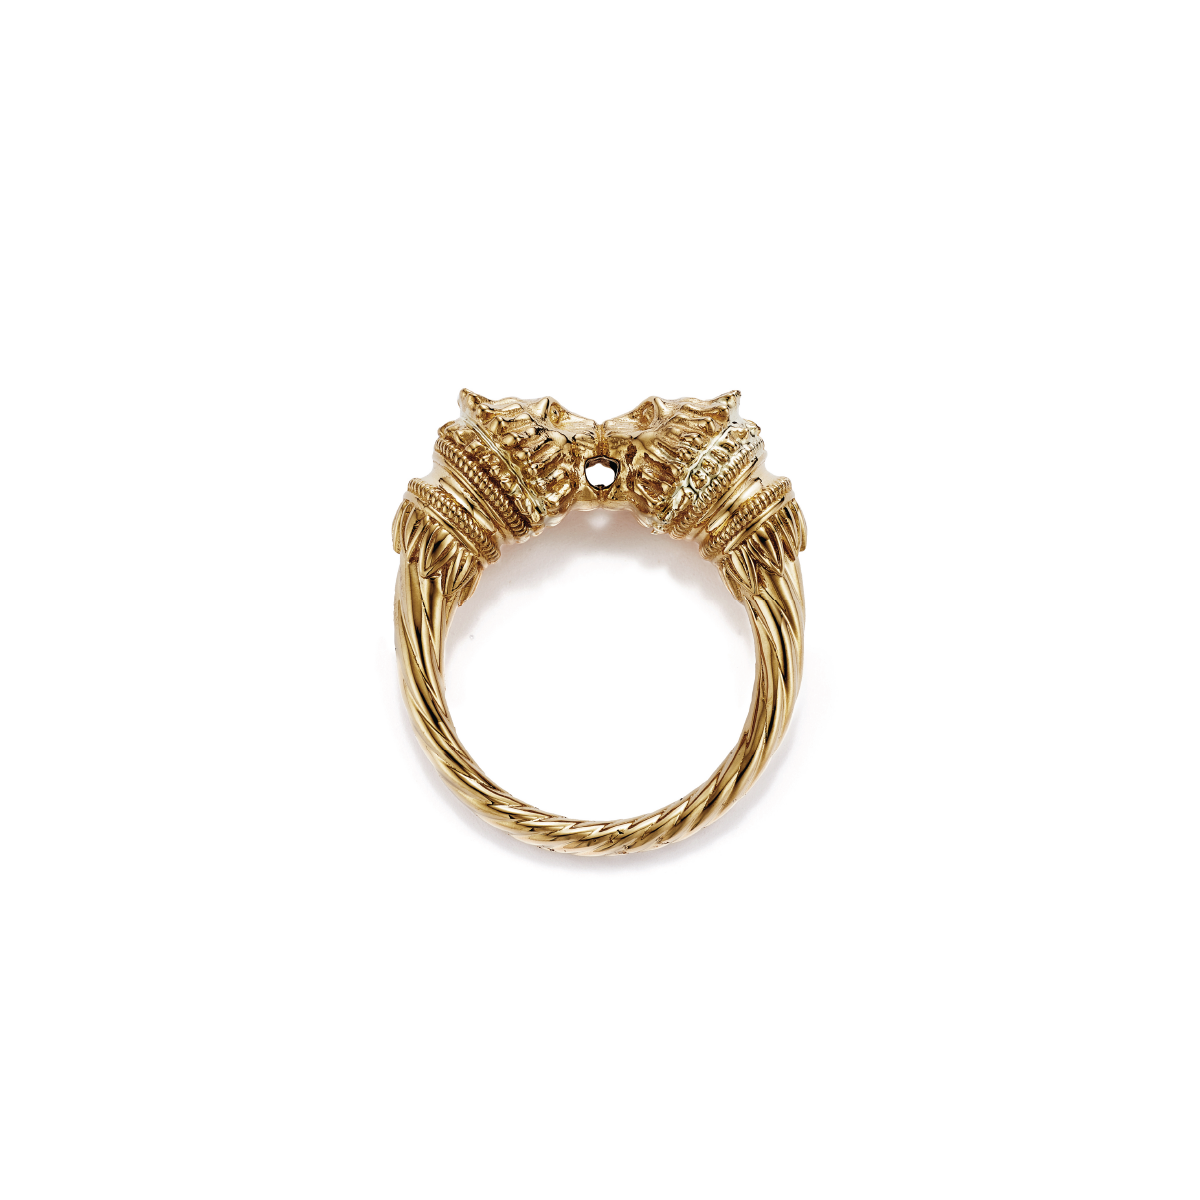 Lion Ring - 18kt Sustainable Gold Ring by FUTURA Jewelry